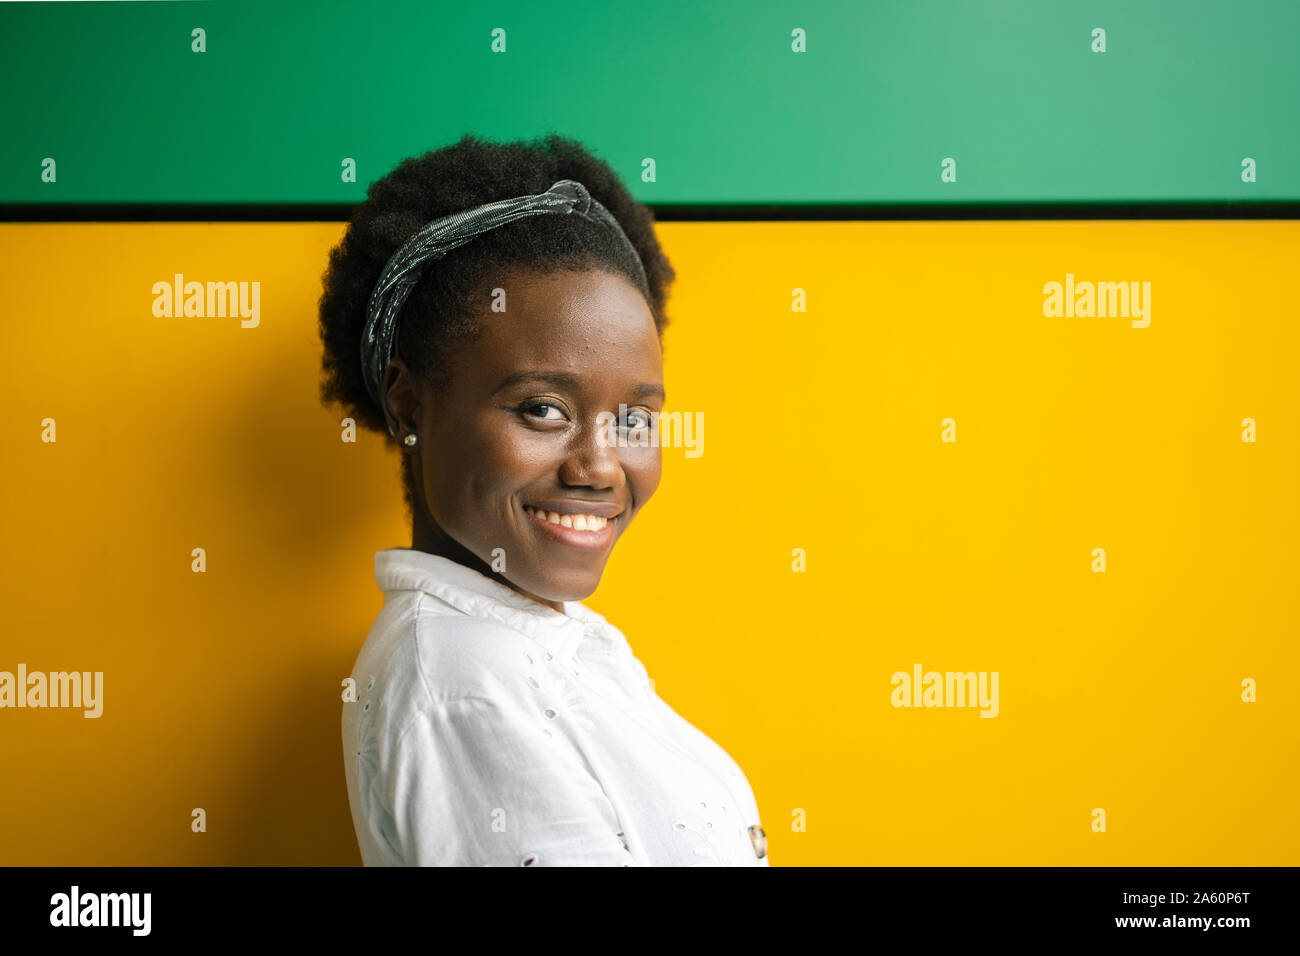 Portrait of smiling young woman in front of yellow and green wall Stock Photo